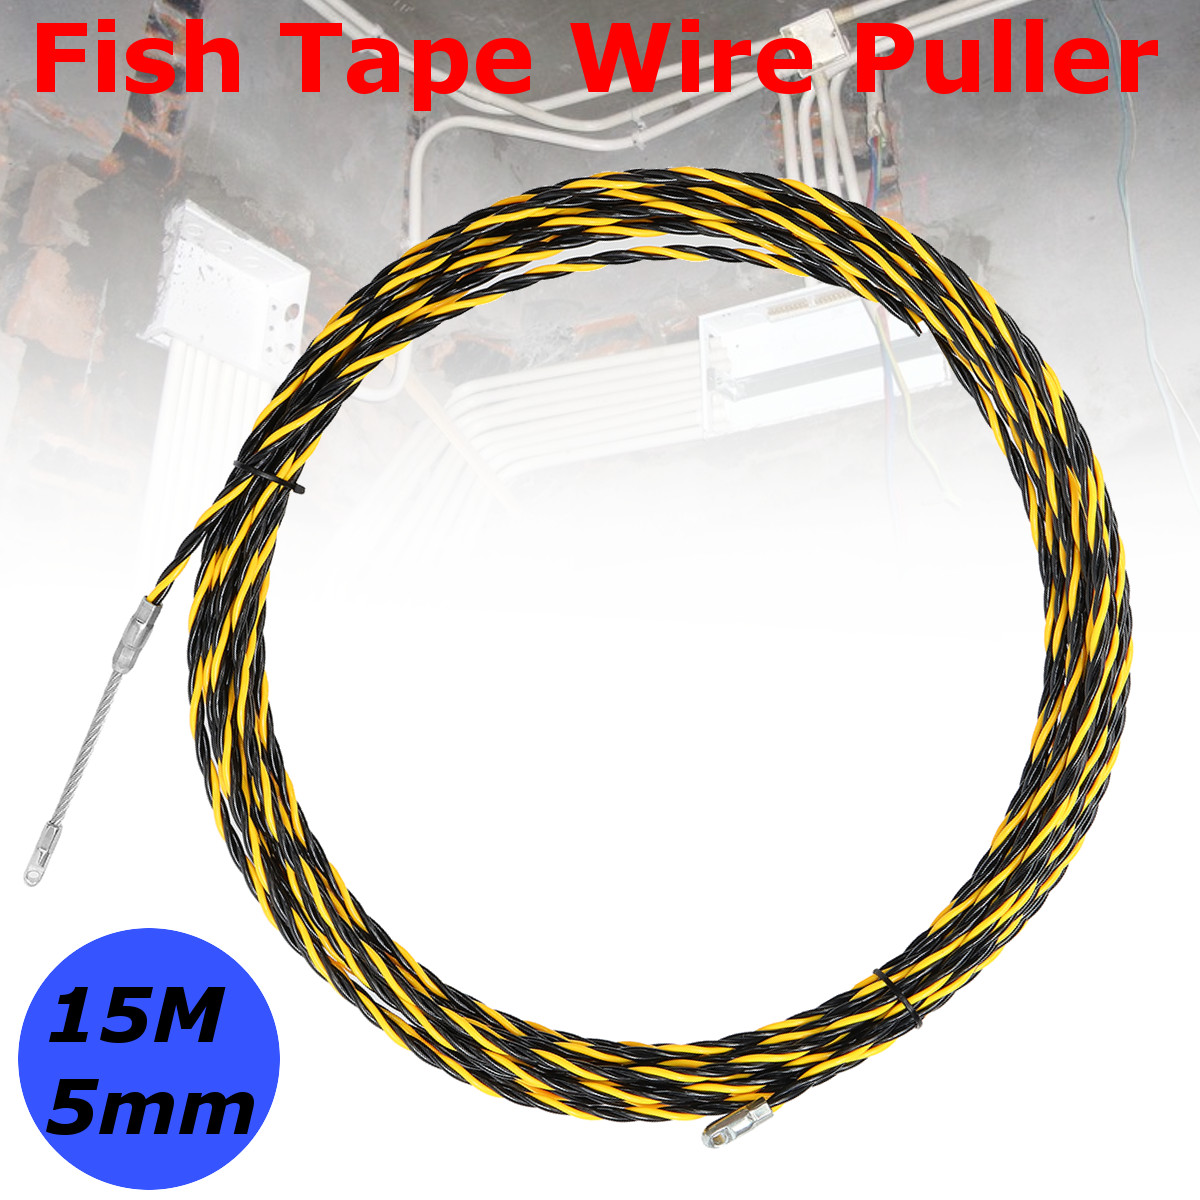 15M-5mm-Spiral-Cable-Puller-Conduit-Snake-Cable-Rodder-Fish-Tape-Wire-Guide-1323138-1